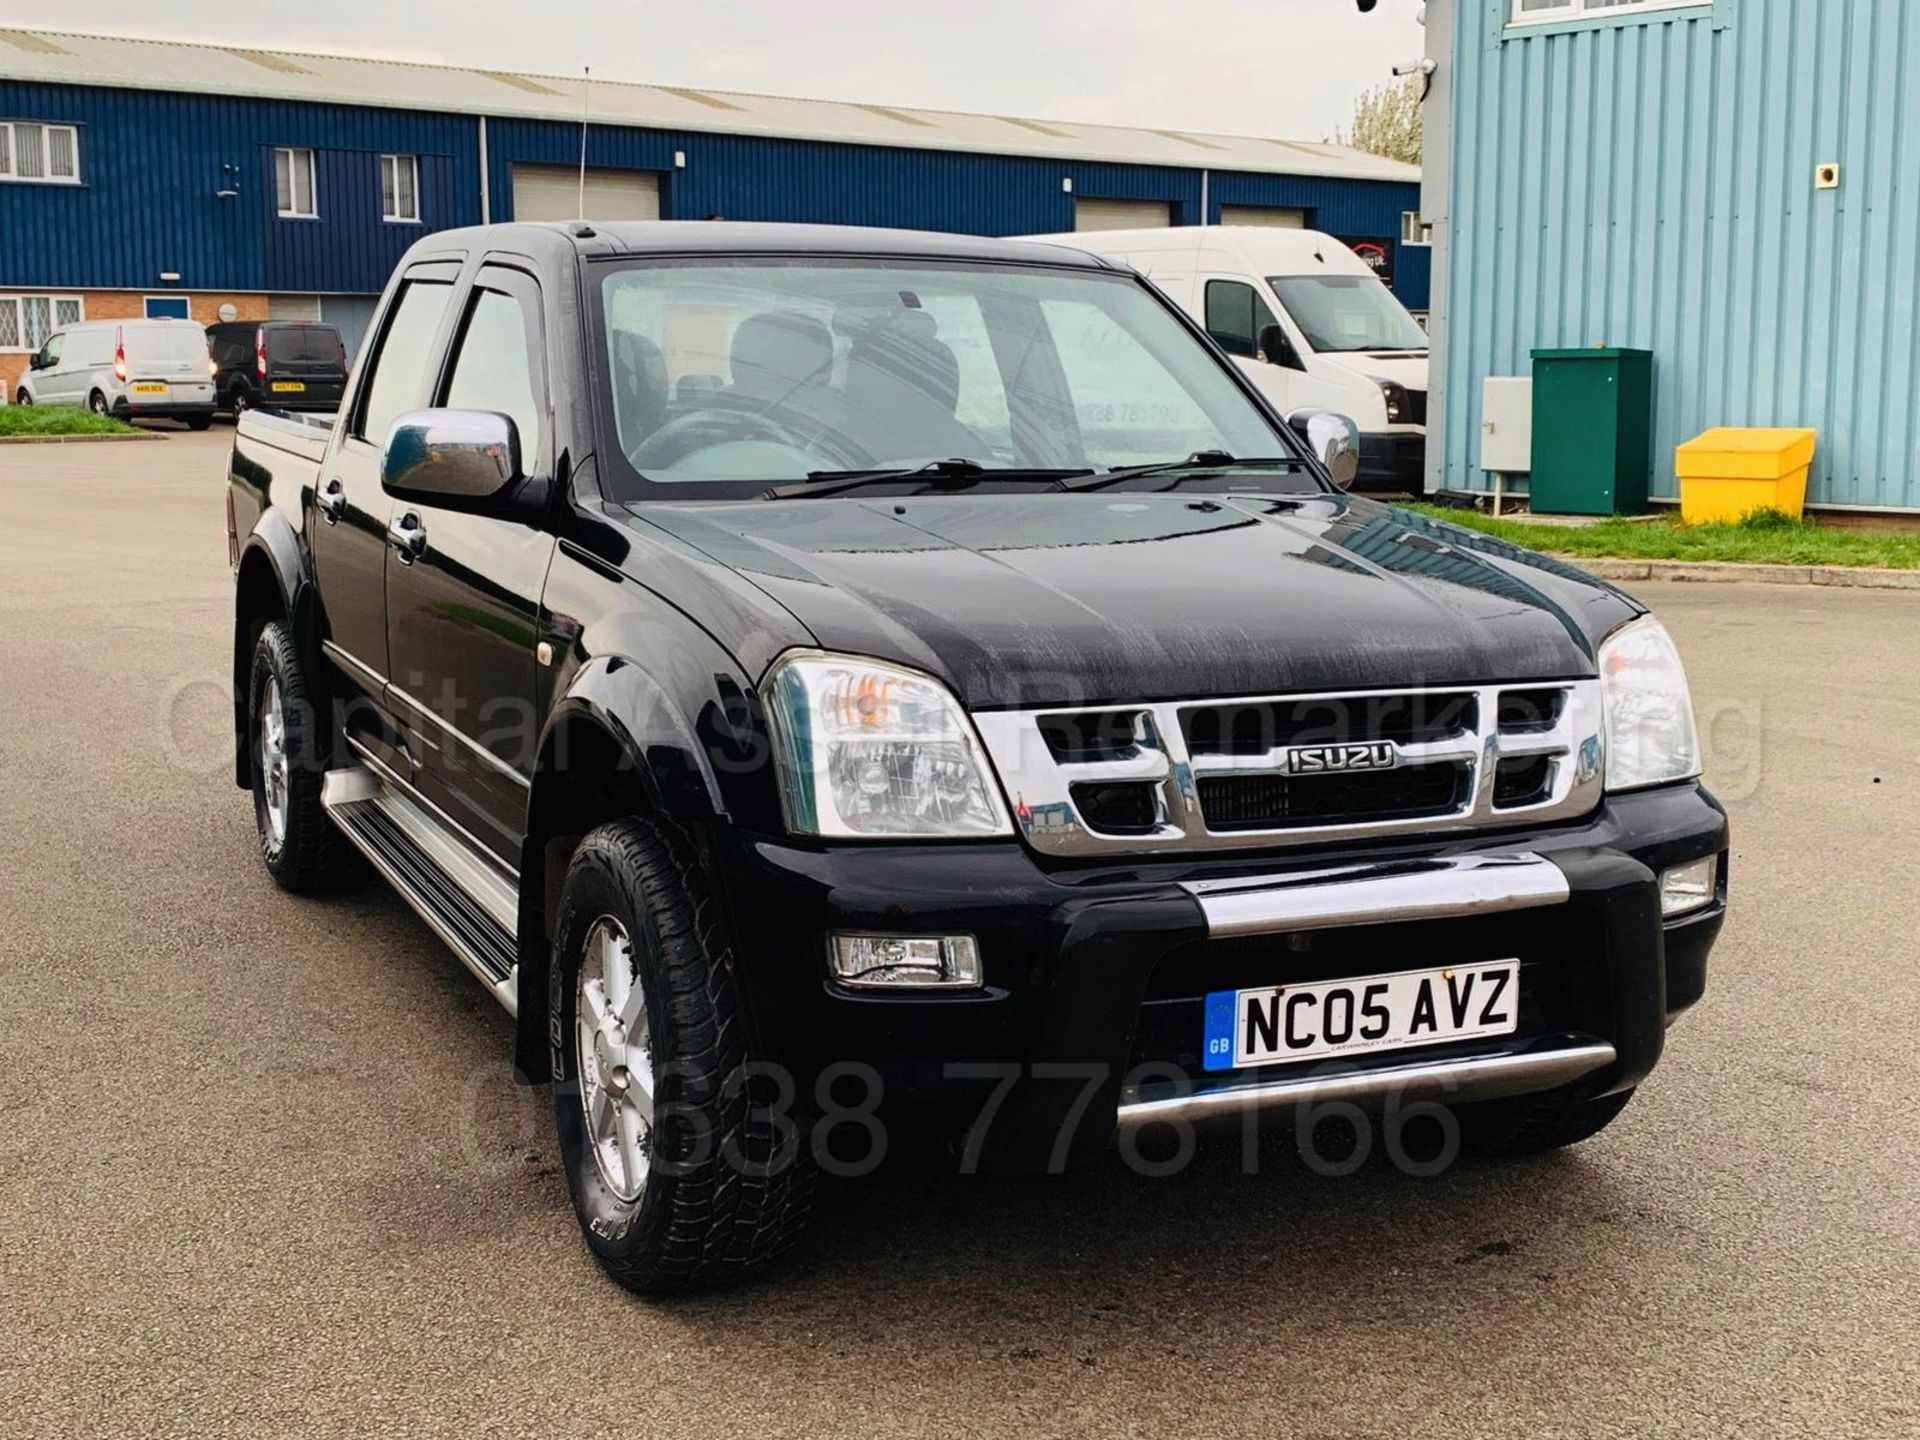 ISUZU RODEO DENVER *DOUBLE CAB PICK-UP* (2005) '3.0 TURBO DIESEL - 130 BHP' *LEATHER - A/C* (NO VAT) - Image 10 of 23